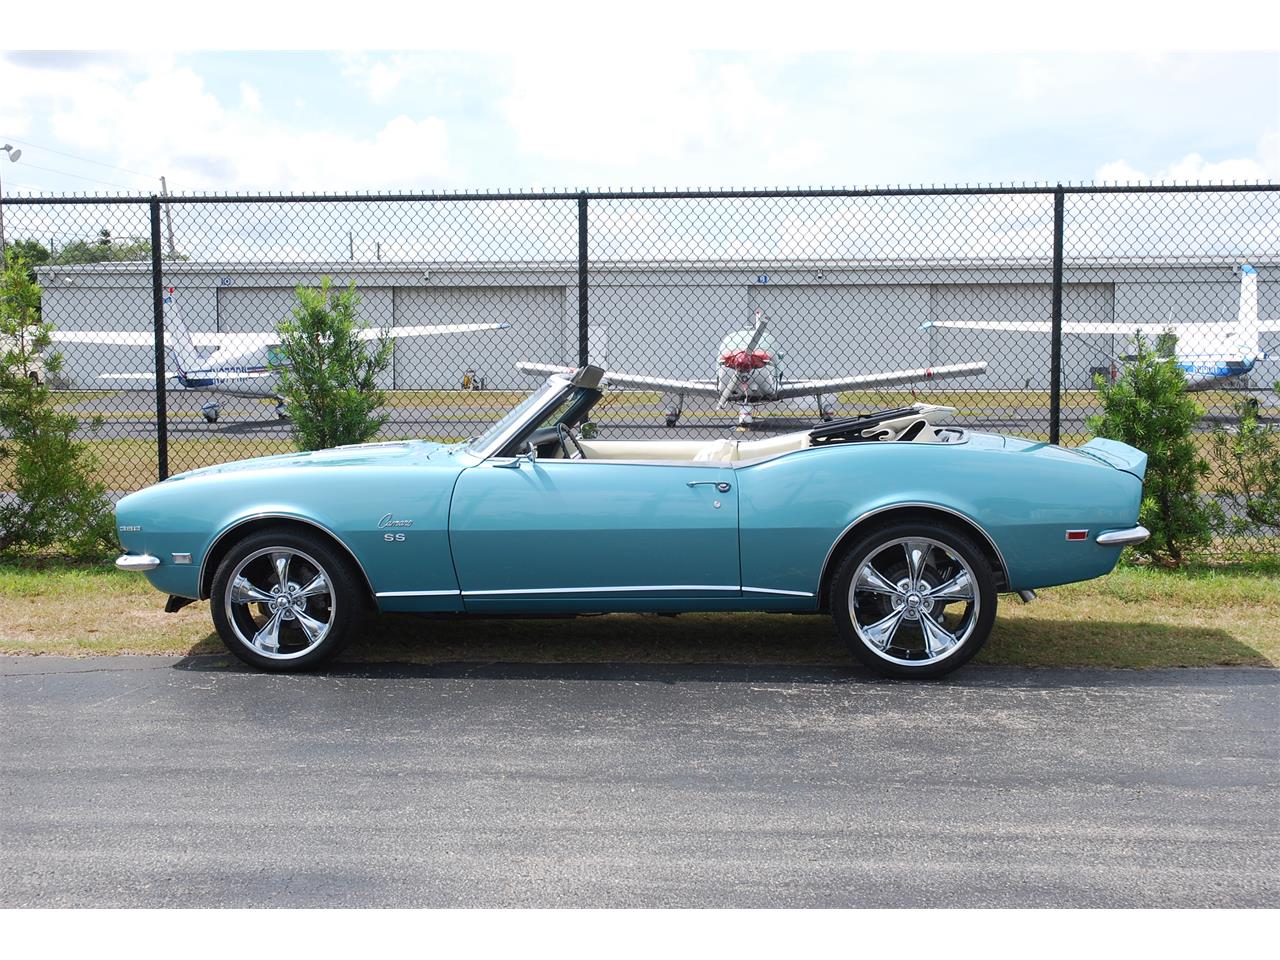 1968 Chevrolet Camaro Rs Ss Convertible For Sale Classiccars Com Cc